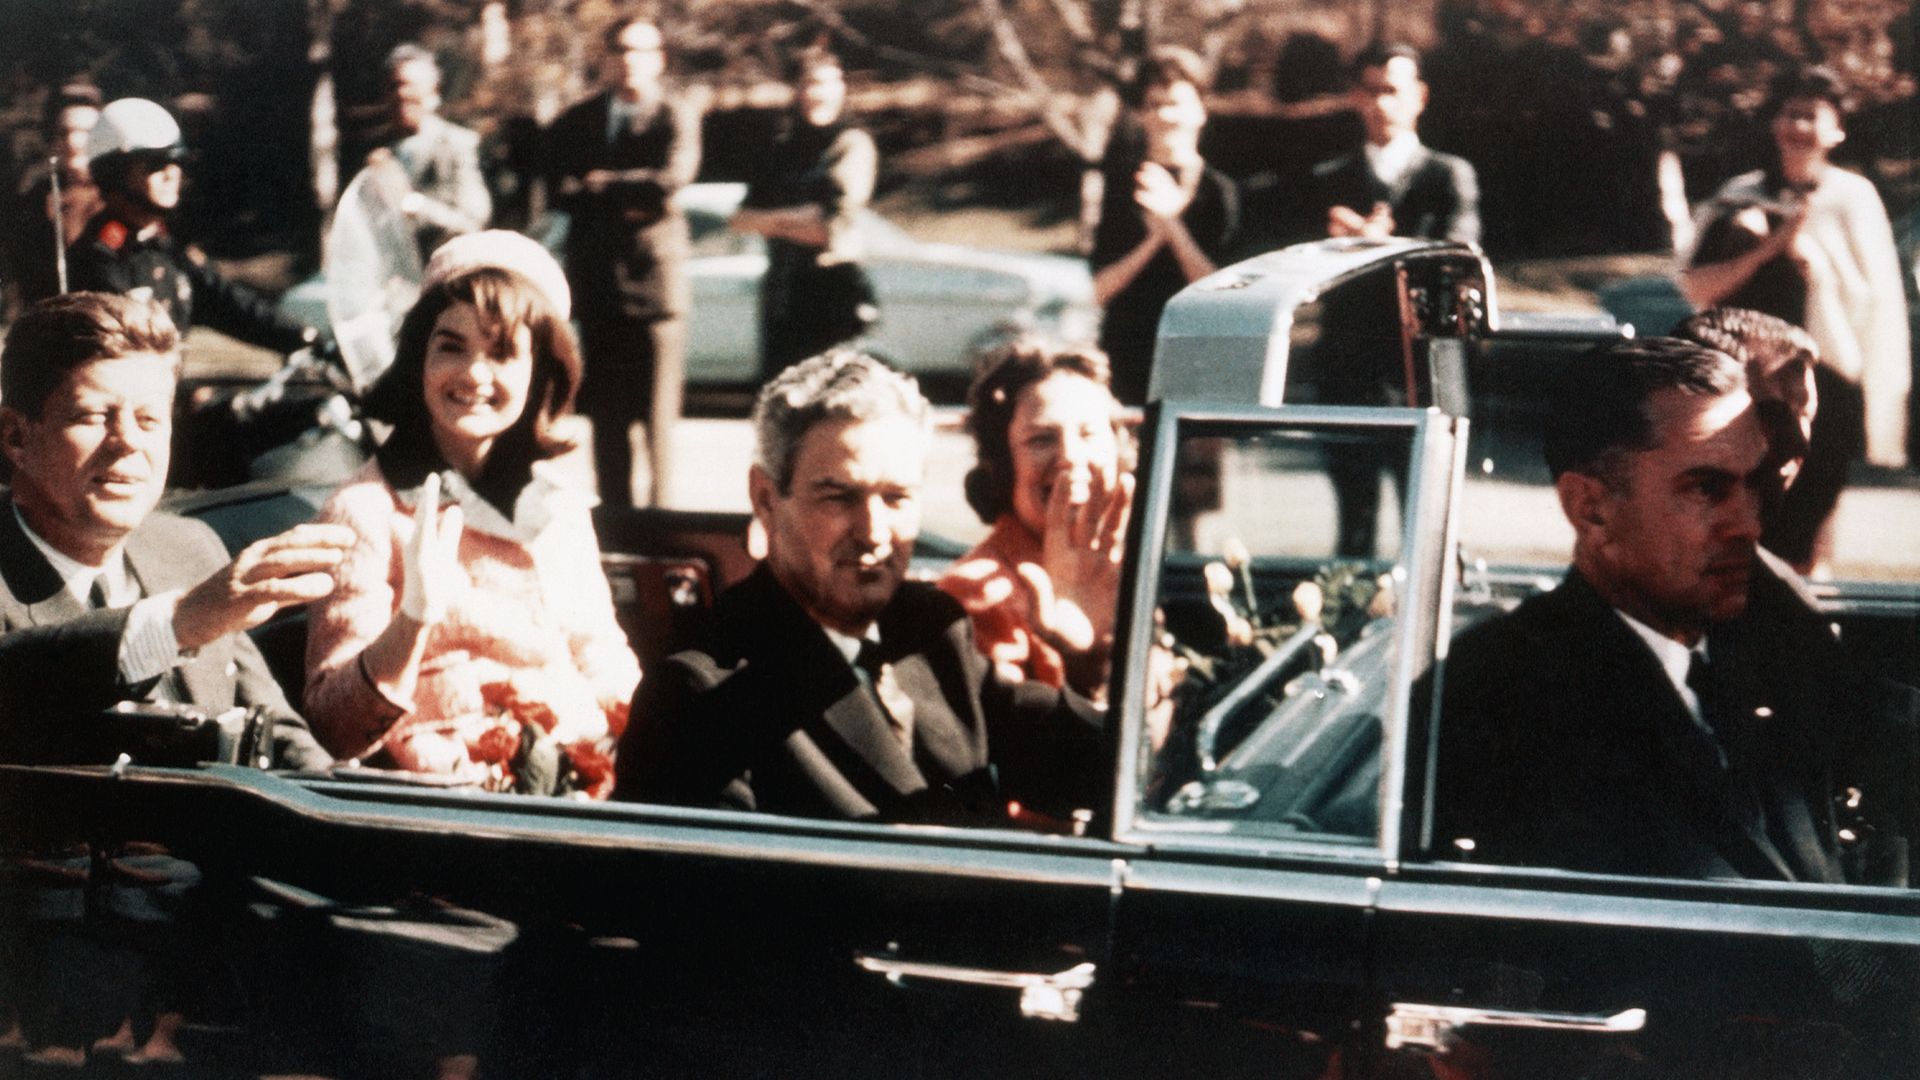  Prior to his assassination, President John F. Kennedy, First Lady Jacqueline Kennedy, and Texas Governor John Connally ride through the streets of Dallas, Texas on November 22, 1963. 